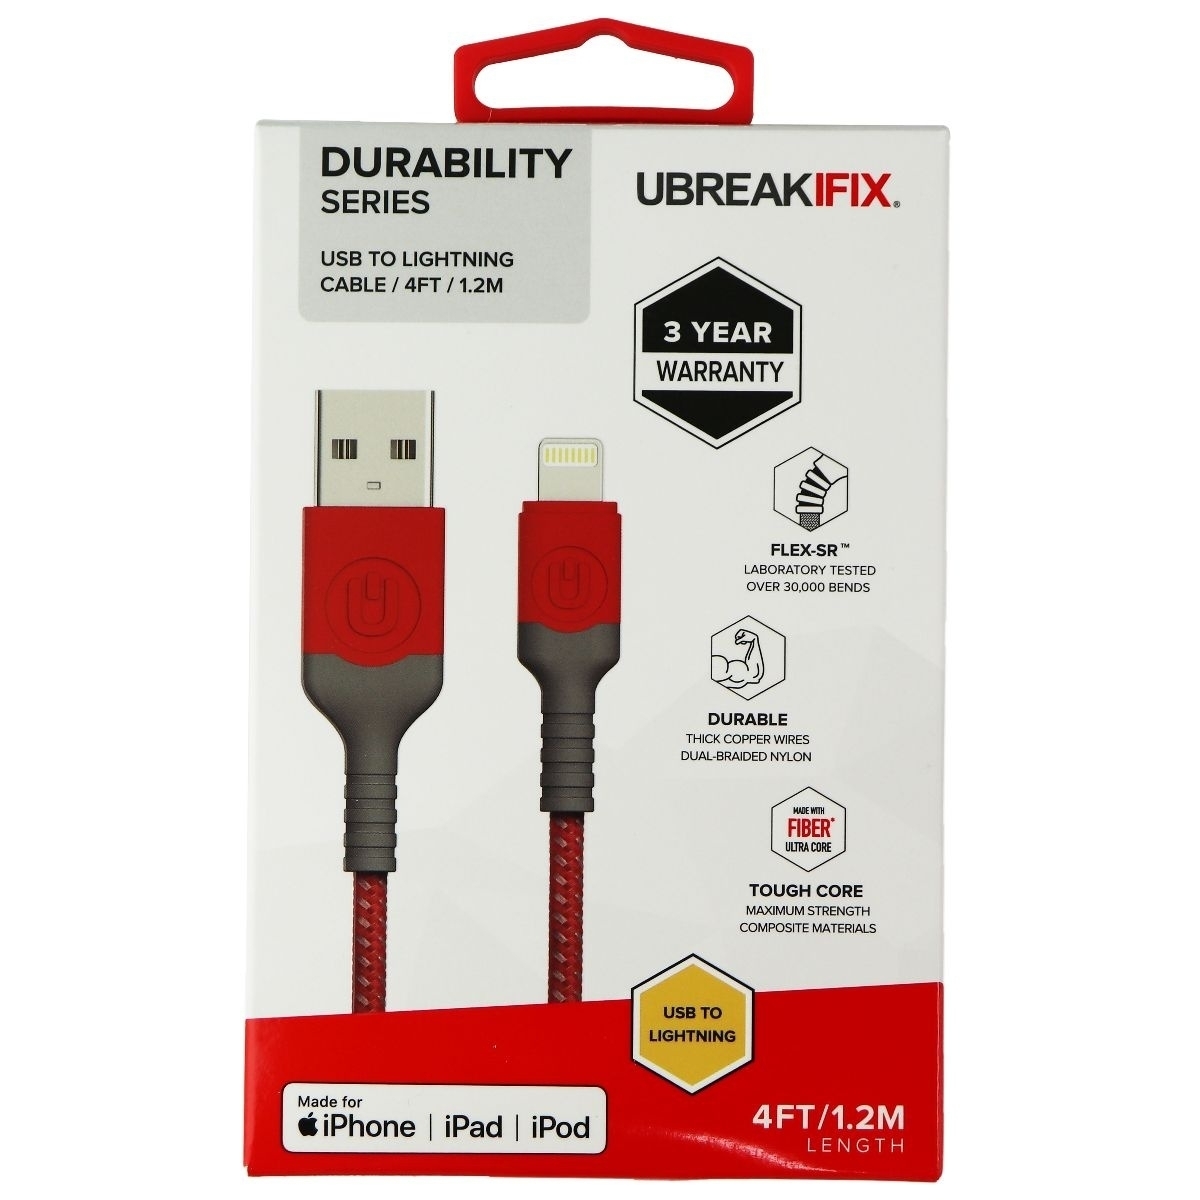 UBREAKIFIX (4-Ft) Durability Series Lightning 8-Pin To USB Cable - Red